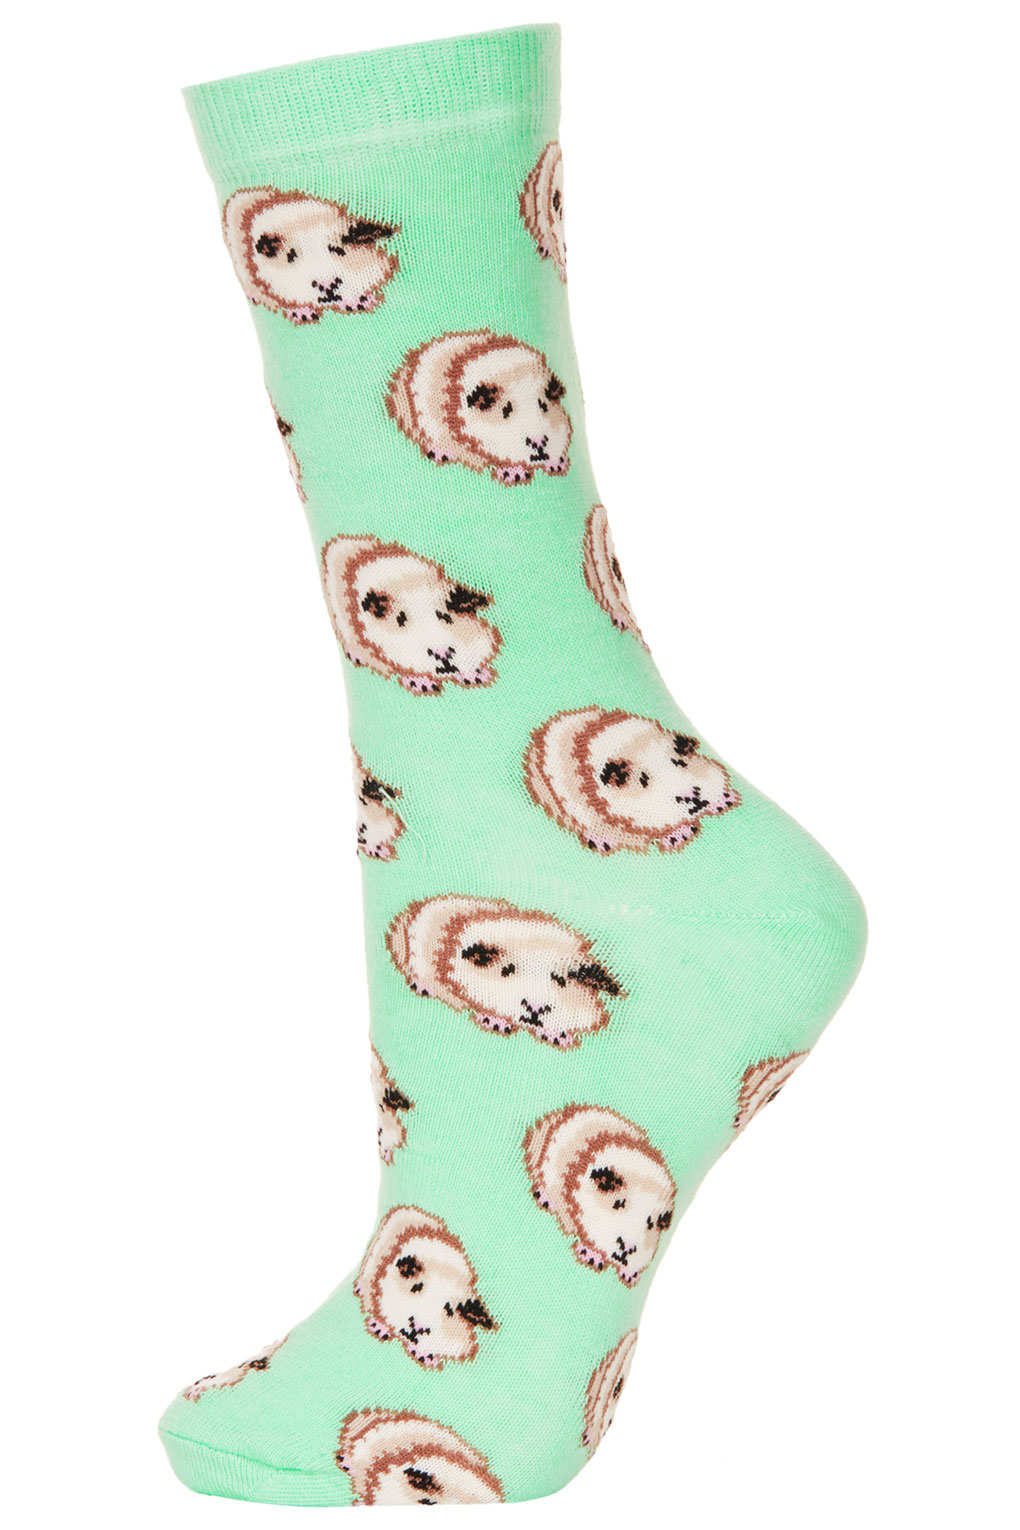 Lyst - Topshop Green Guinea Pig Ankle Socks in Green